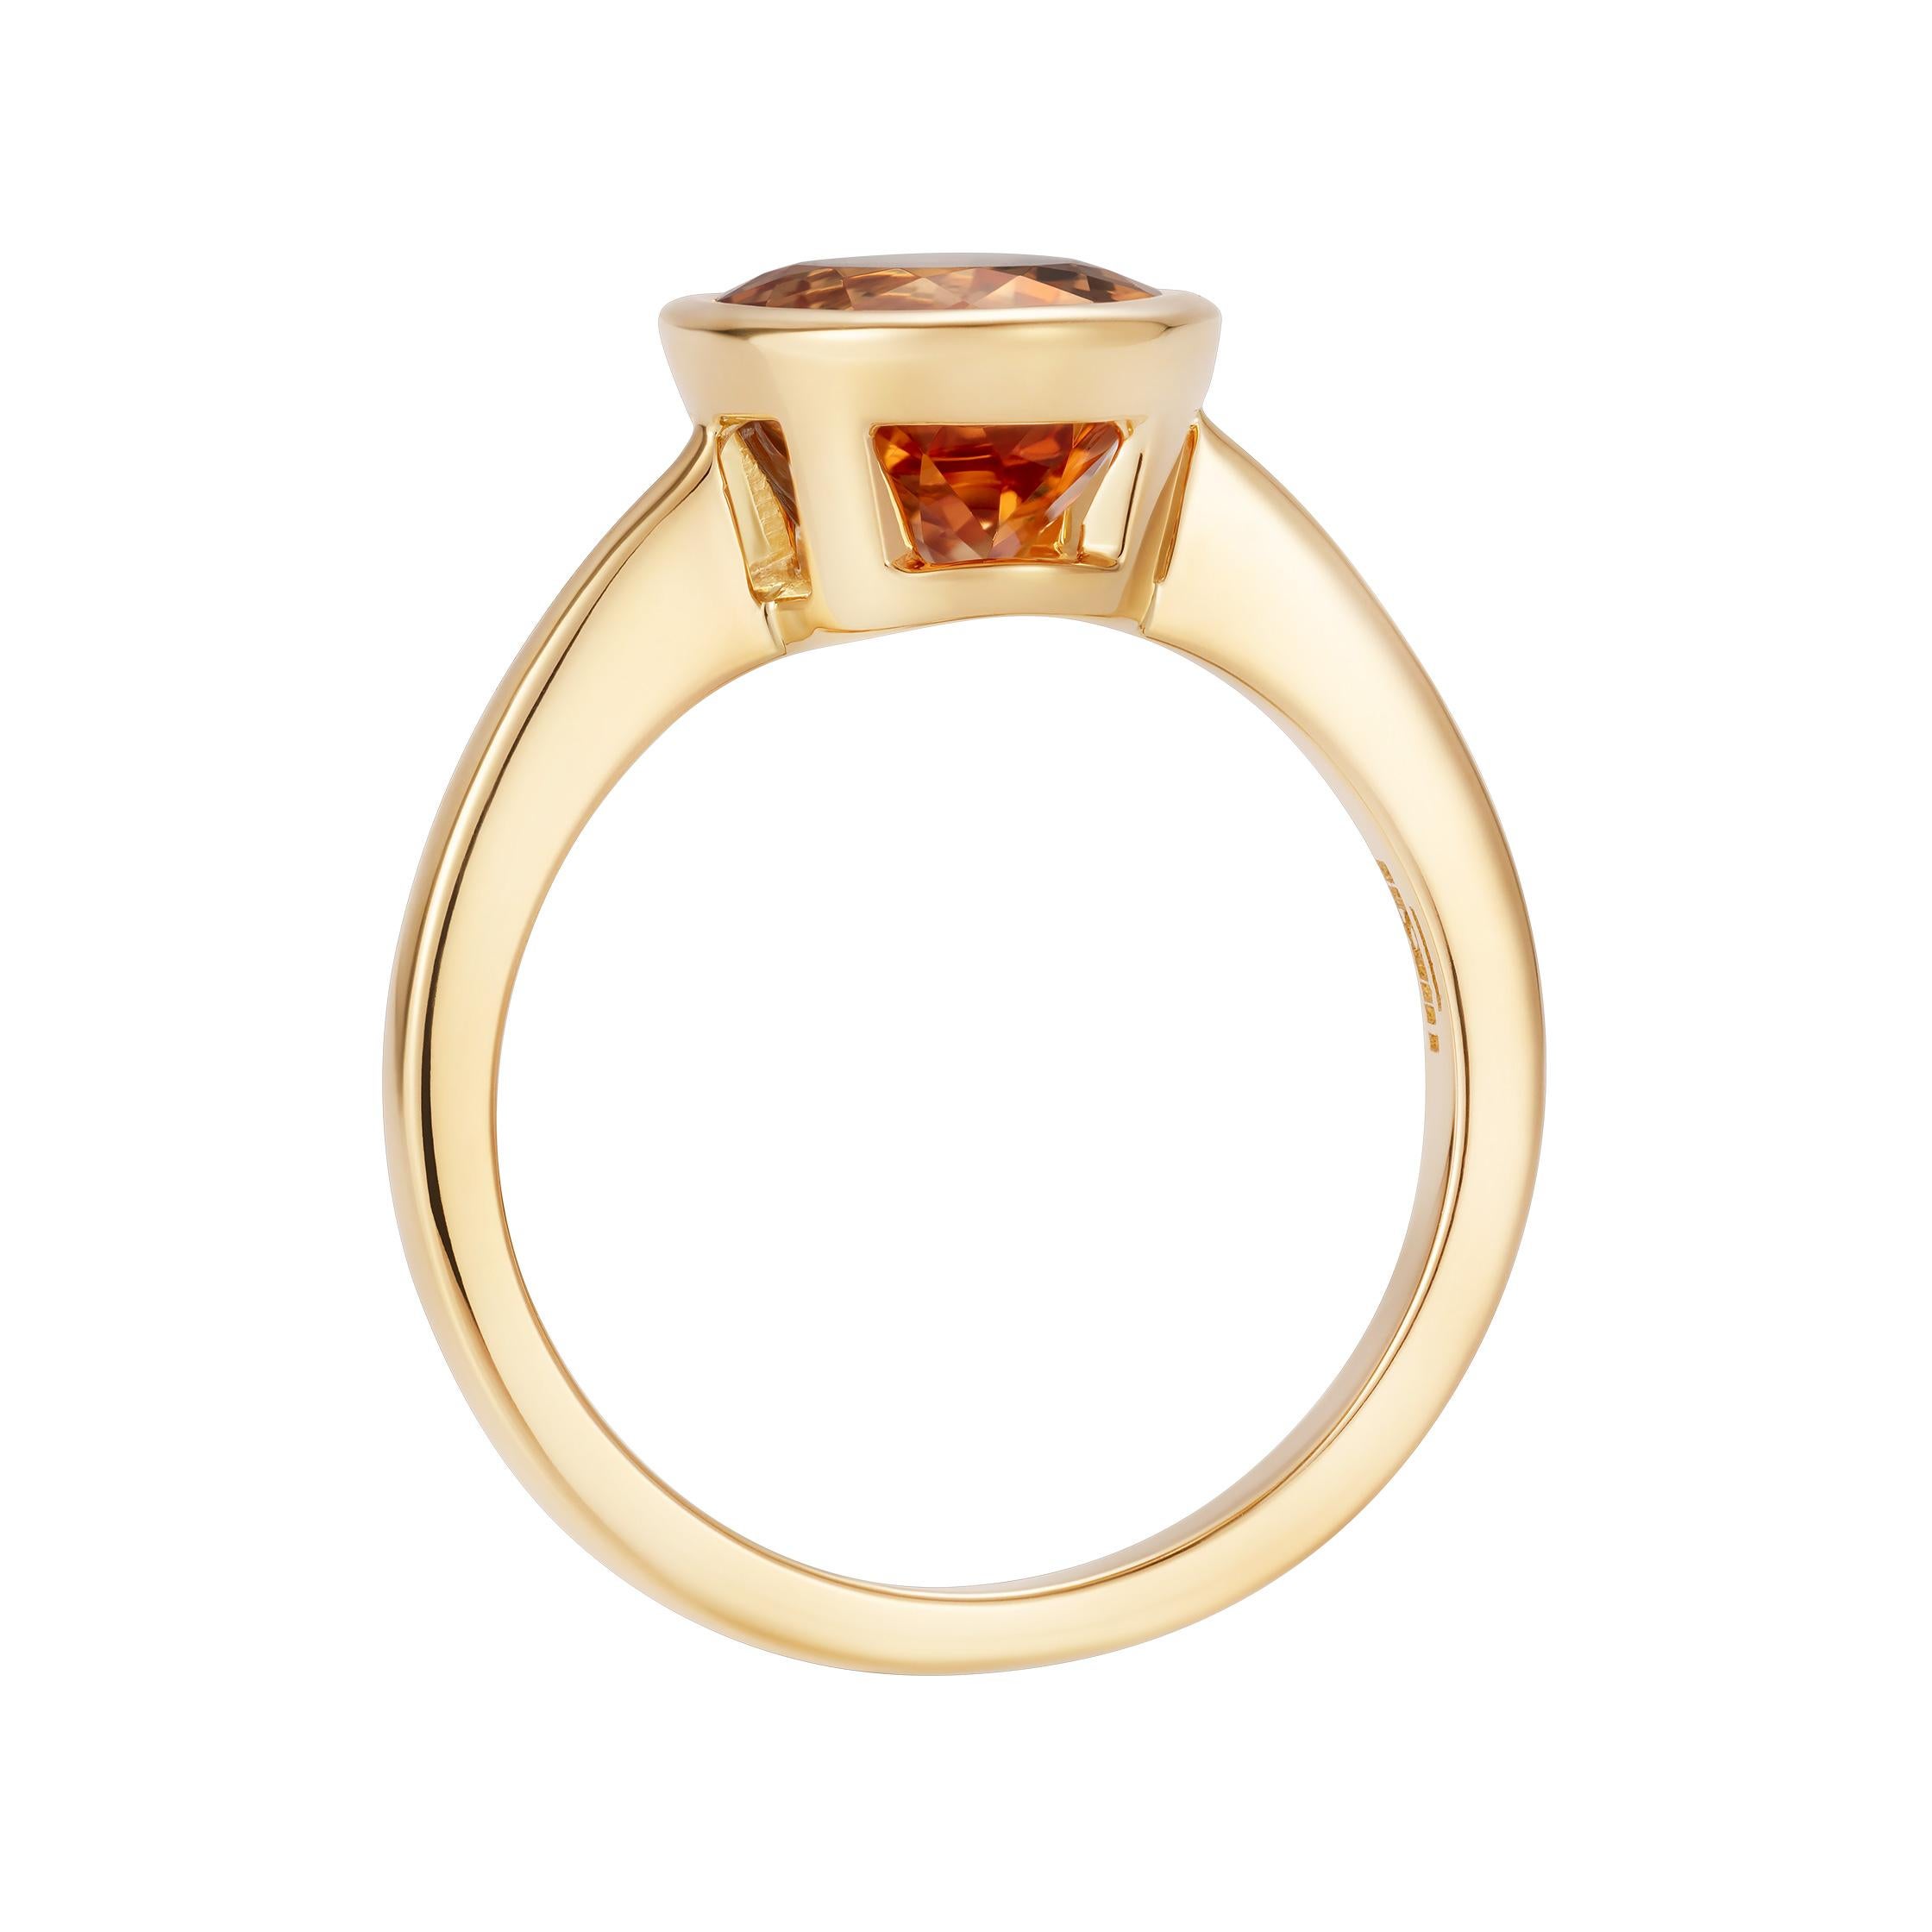 A stunning oval imperial Topaz set in an 18k yellow gold Venus setting.

- 3.89 carat oval golden topaz
- Handmade in 18K yellow gold in our Mayfair atelier

Formed deep within the earth and found on every continent, natural colour gemstones possess